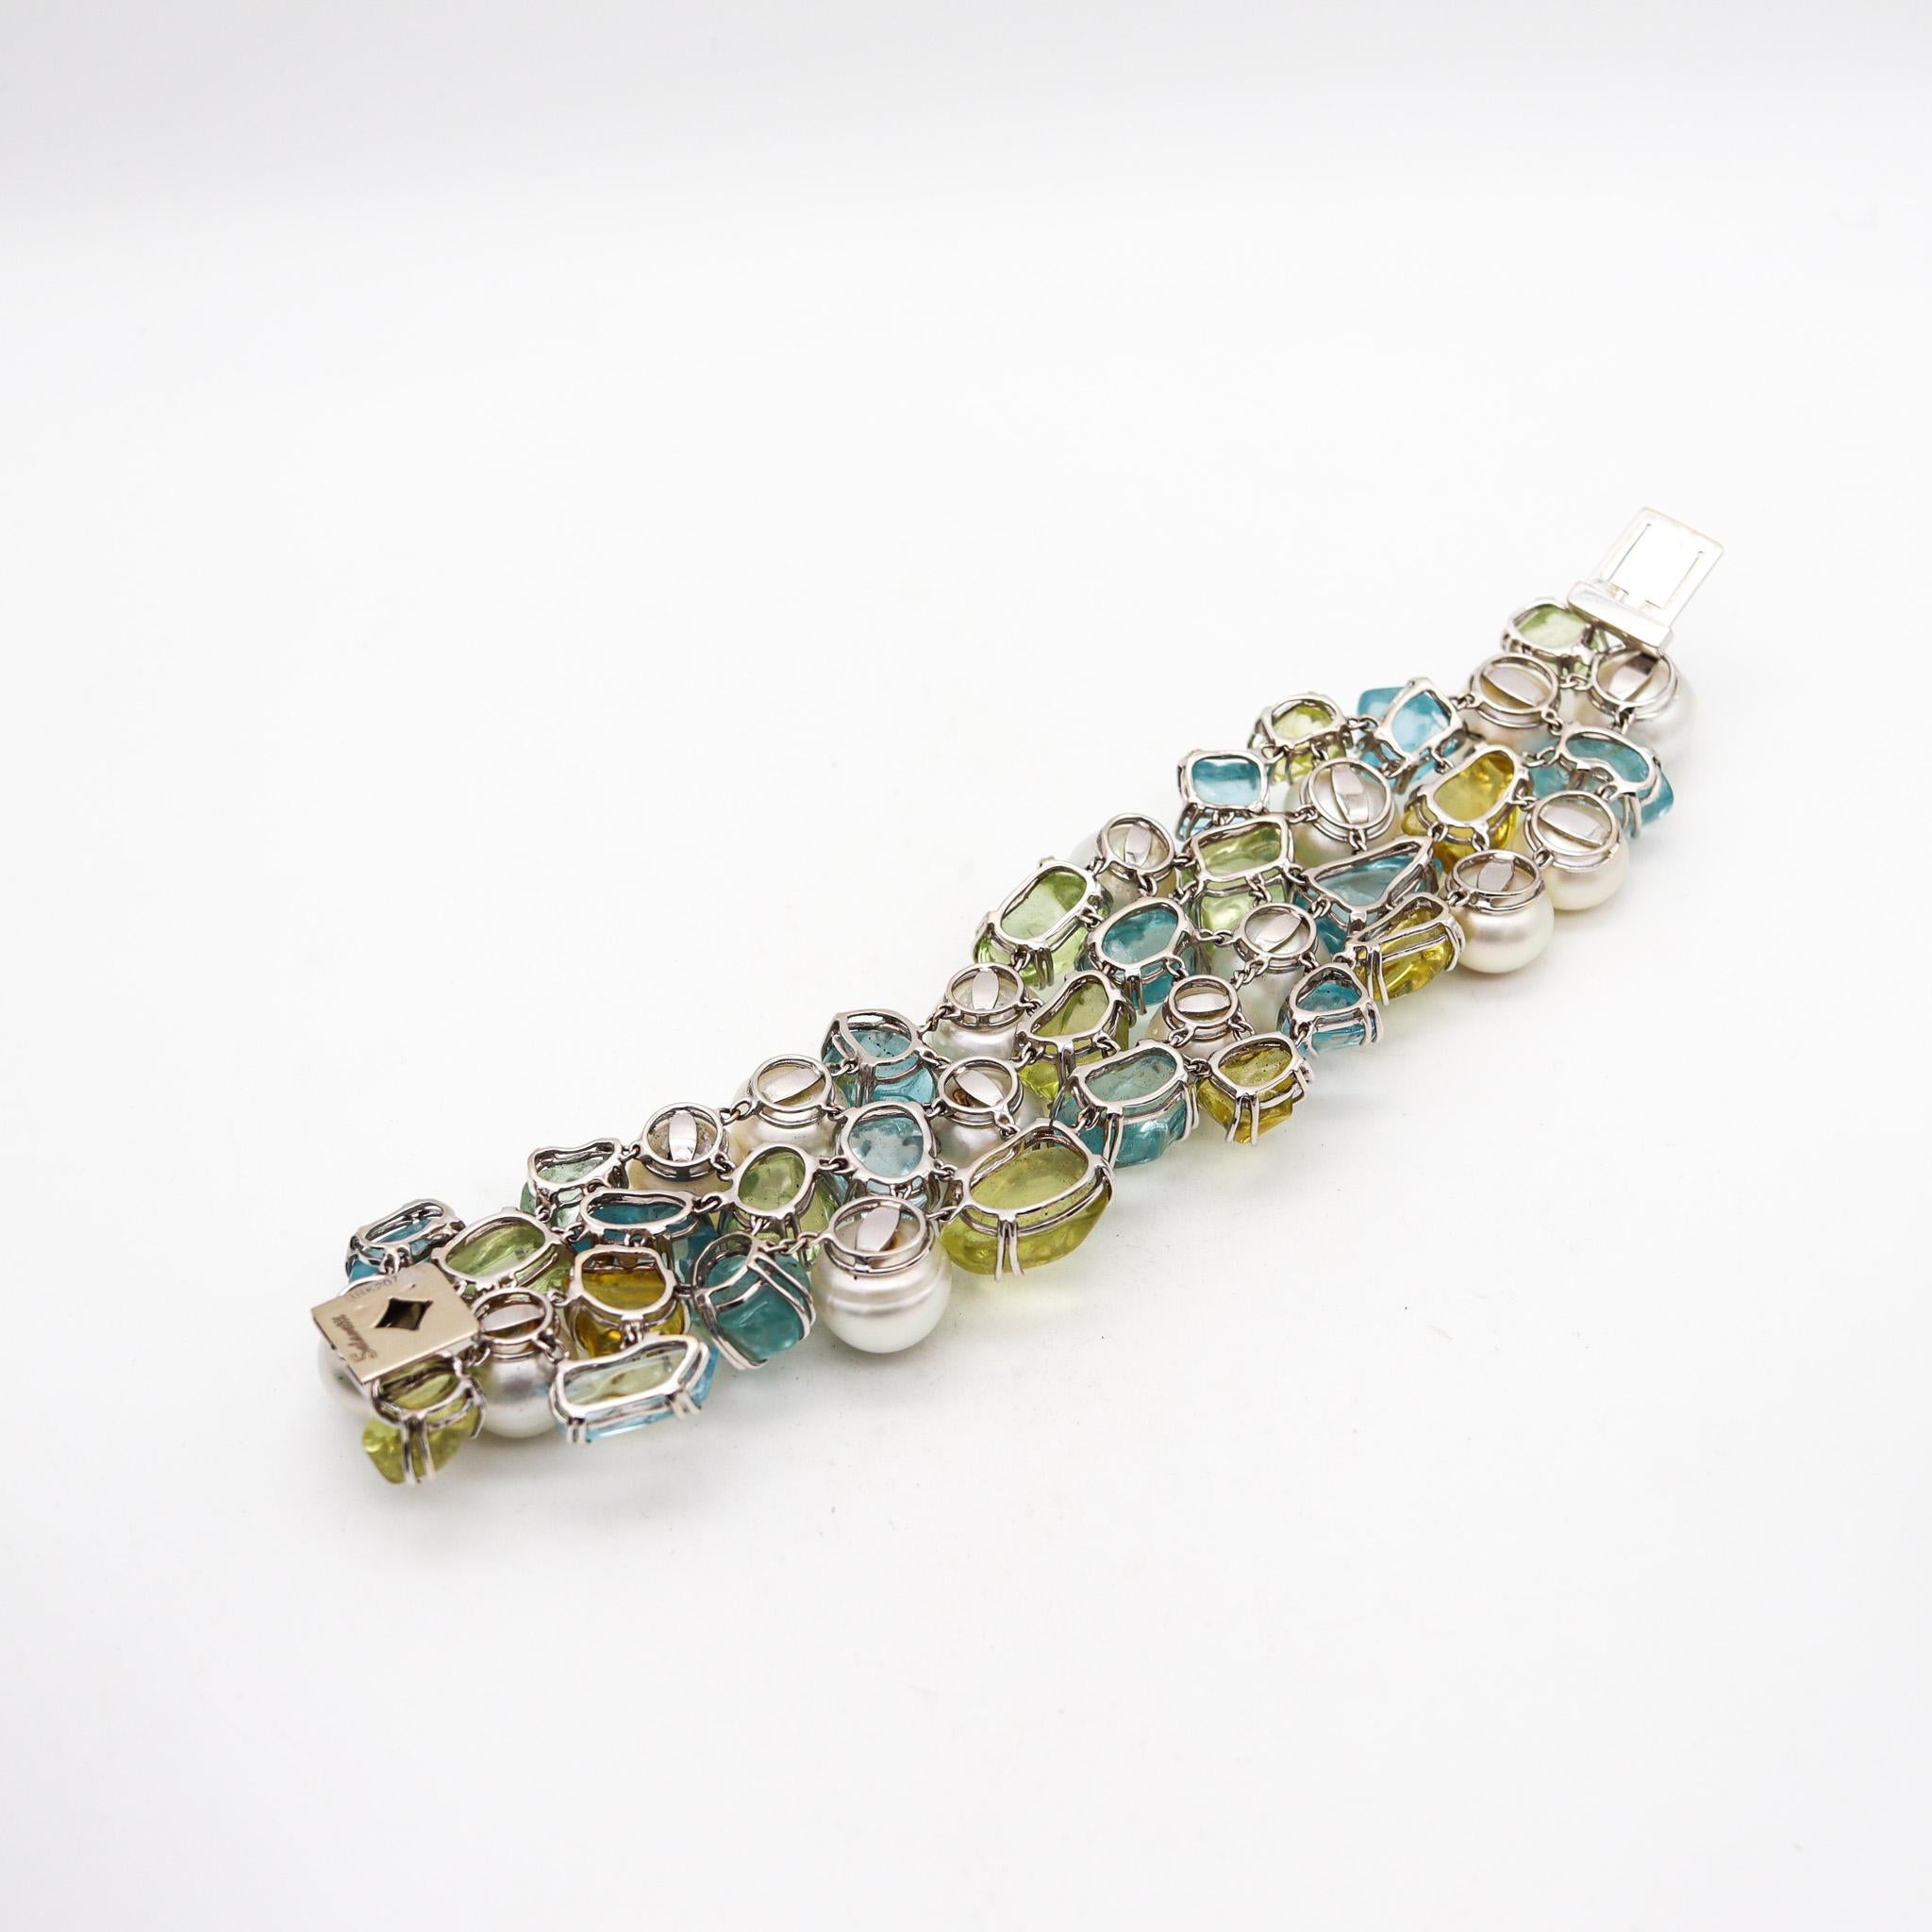 Salavetti Pearls Bracelet In 18Kt White Gold With 108 Ctw Aquamarines And Beryl In Excellent Condition For Sale In Miami, FL